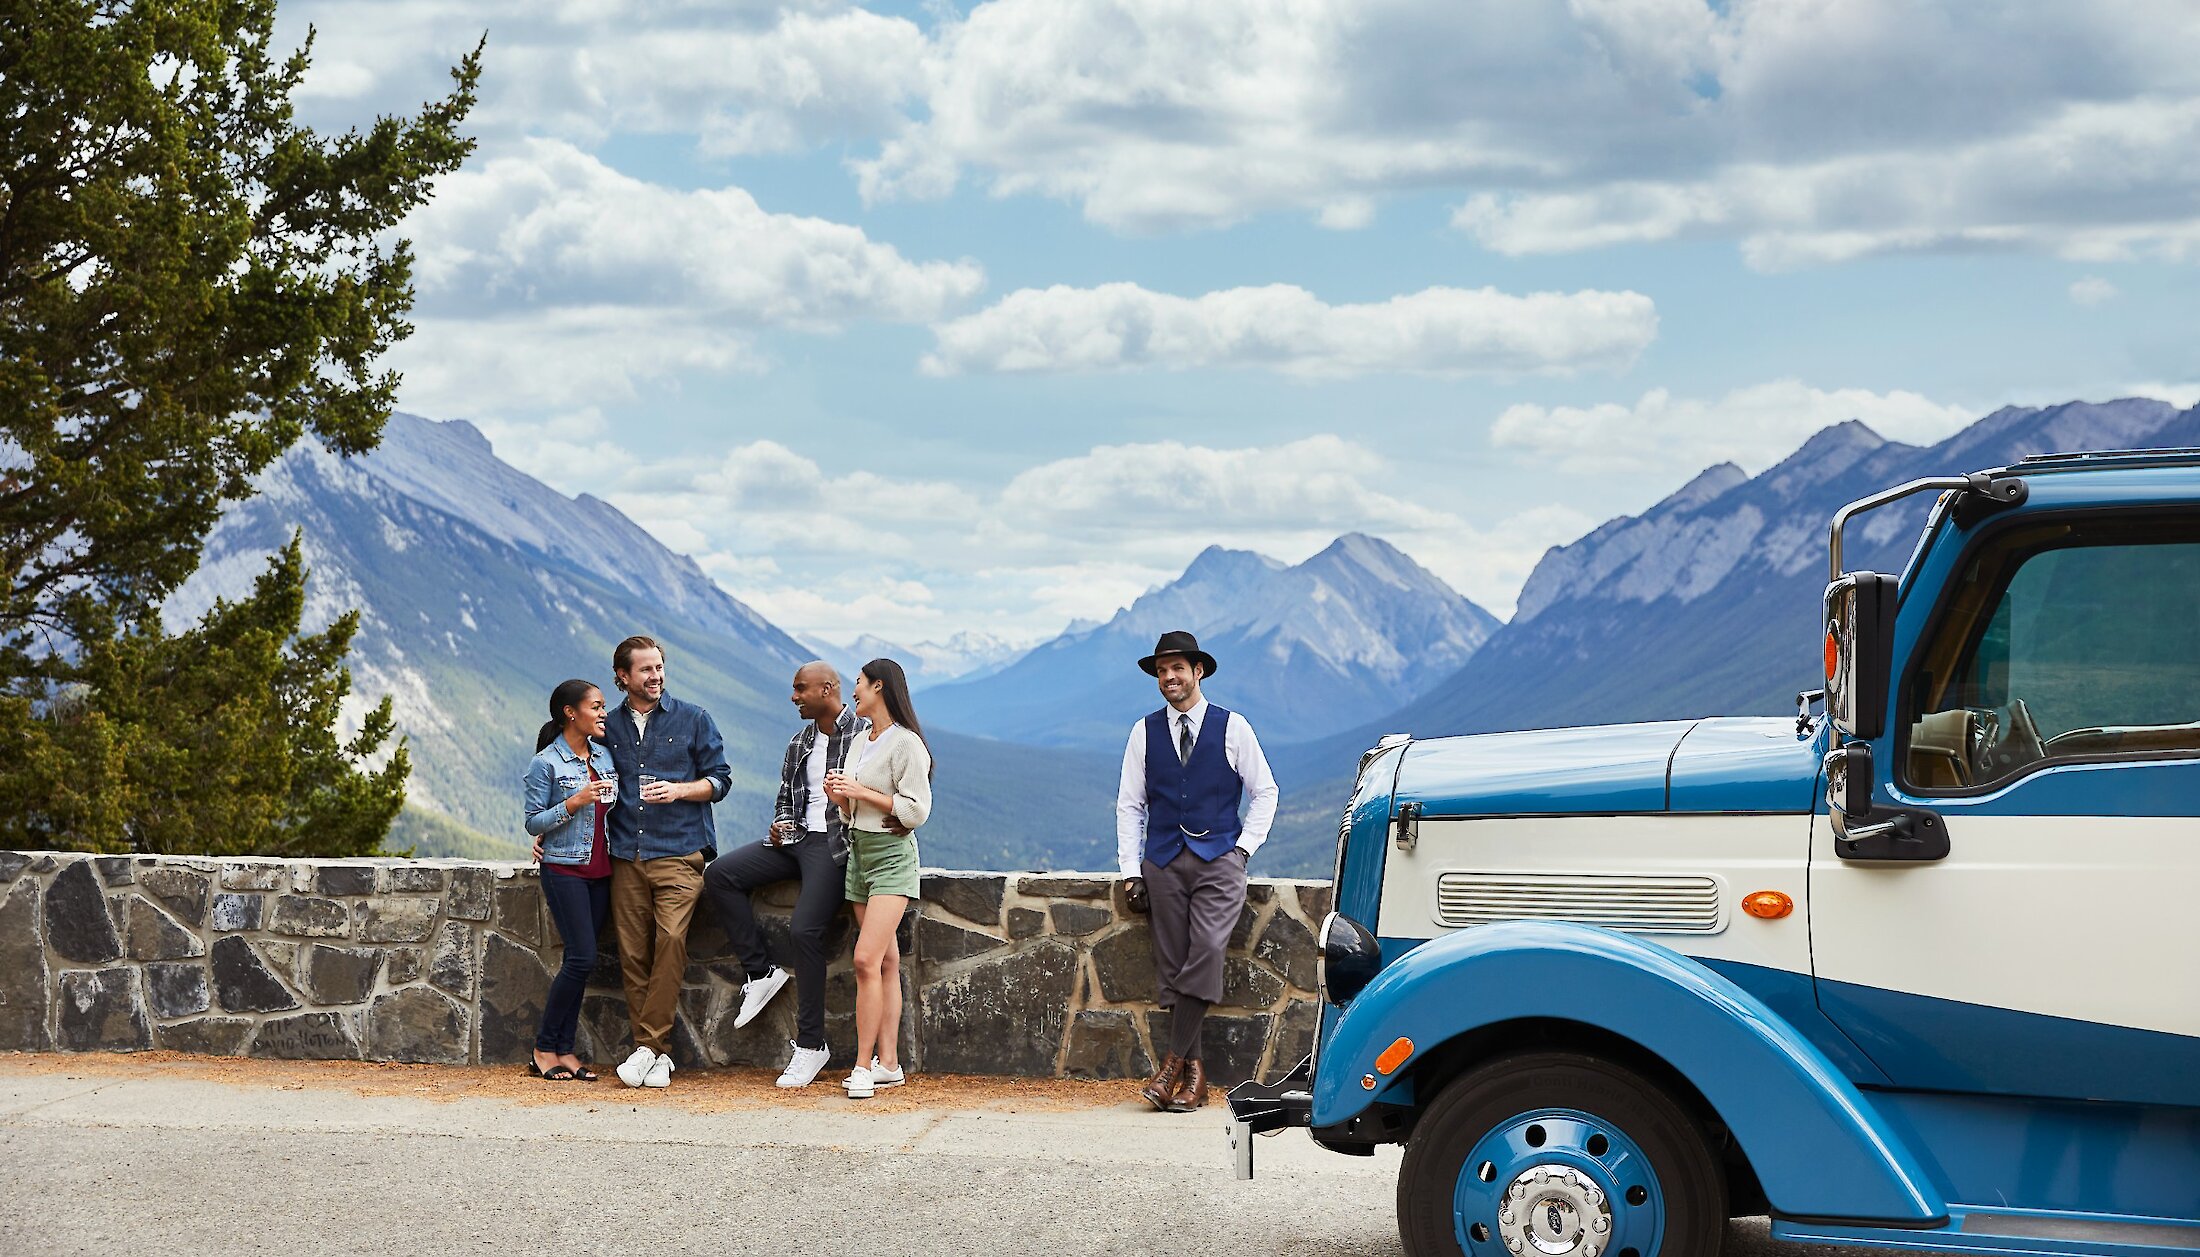 Open Top Guided Tour in Banff in vintage vehicle